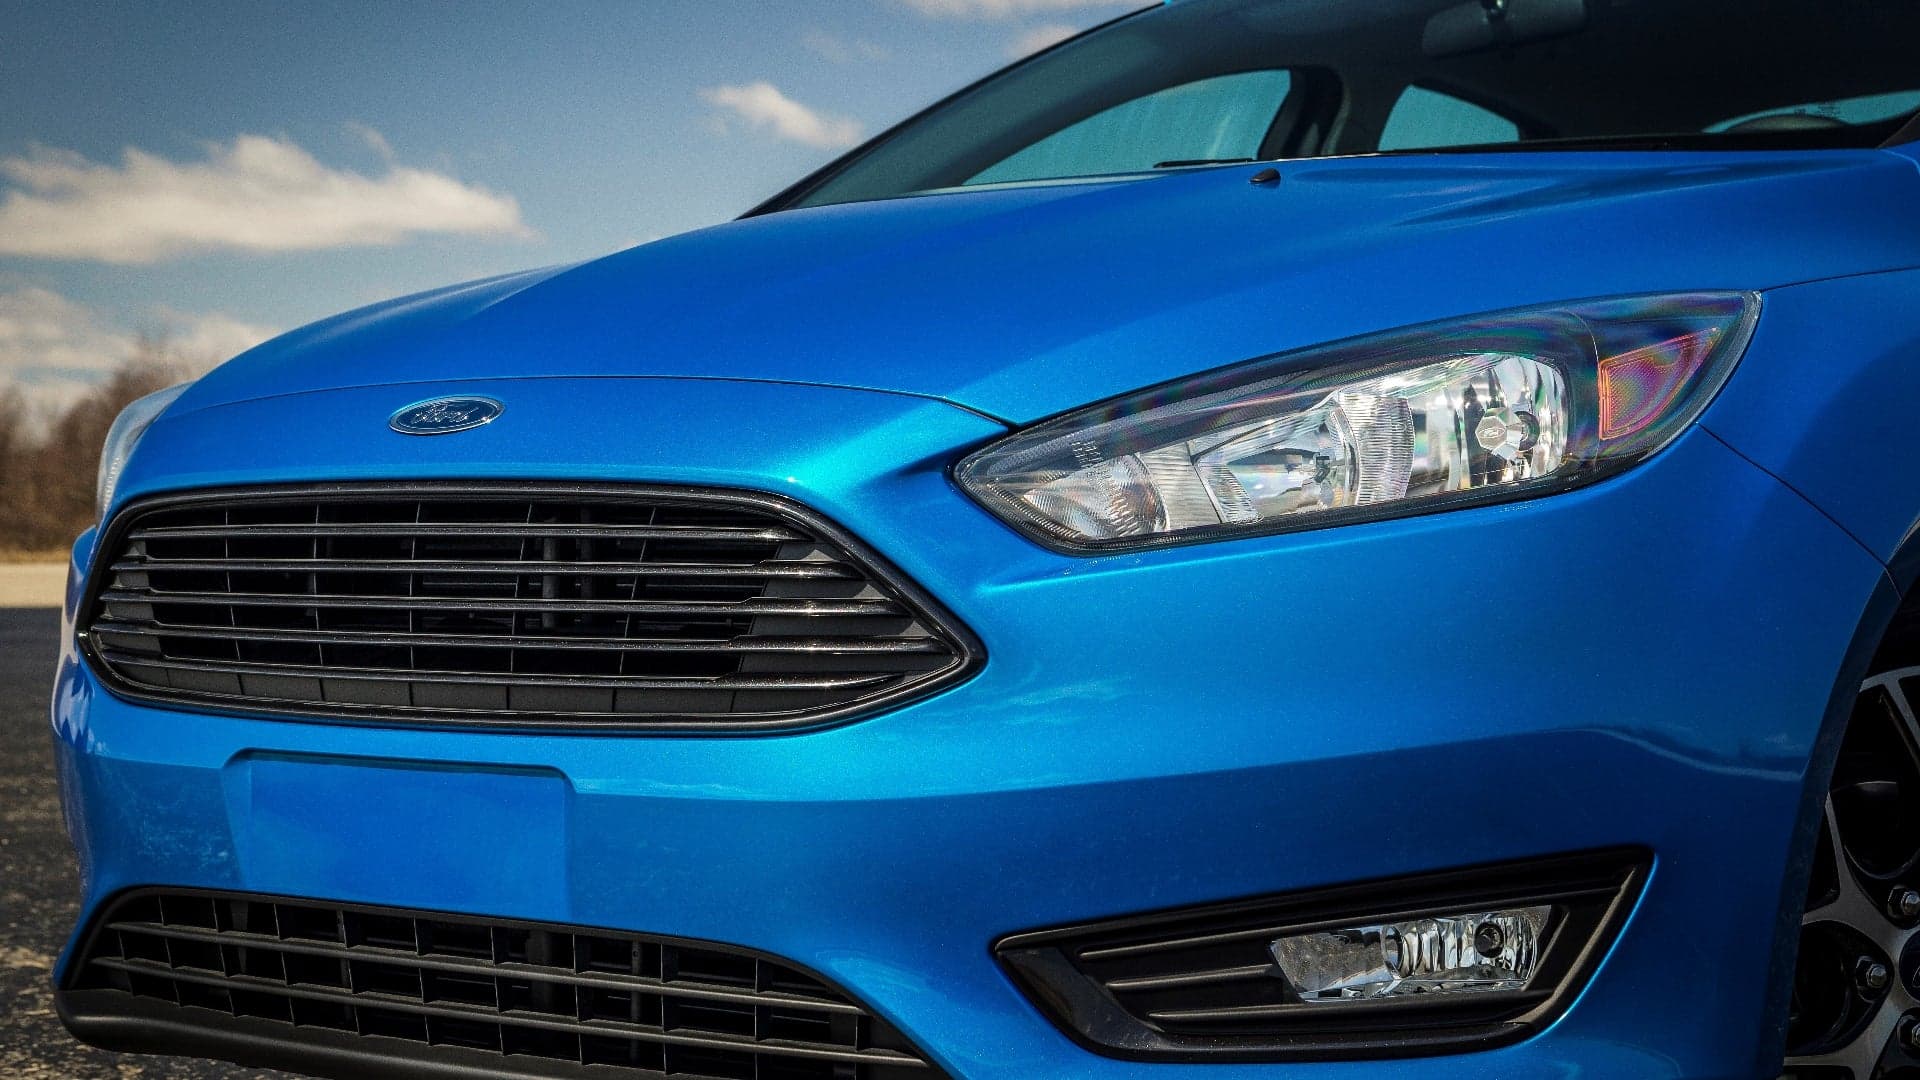 Ford Will Stop Building the Focus for the US for About a Year